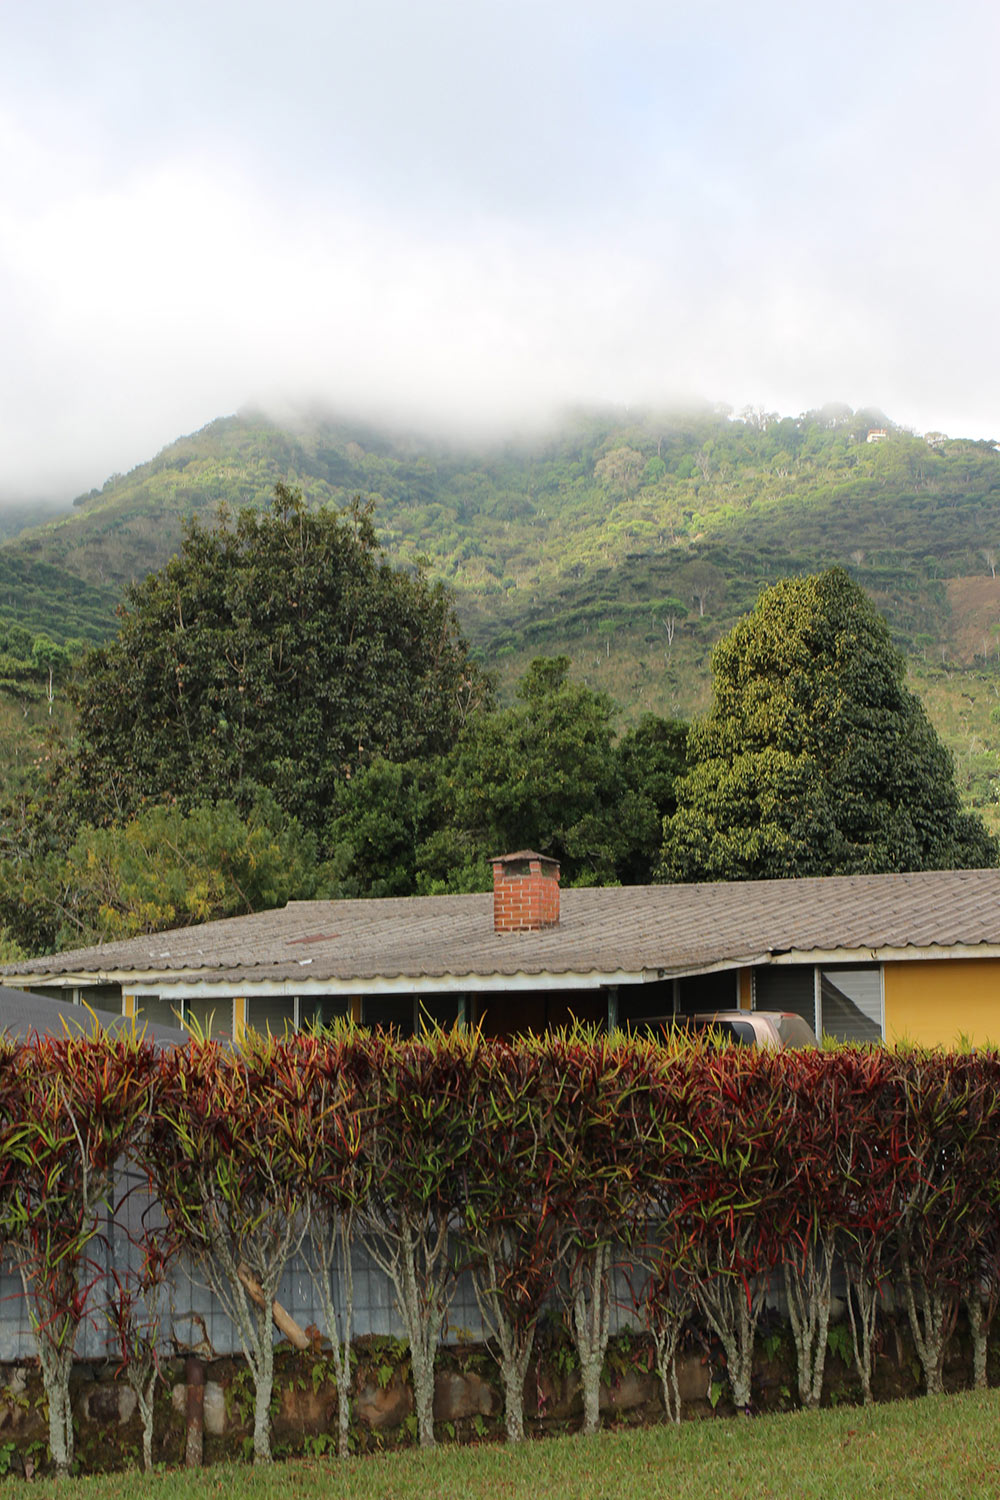 Clouds covering the upper reaches of Finca El Manzano in the morning